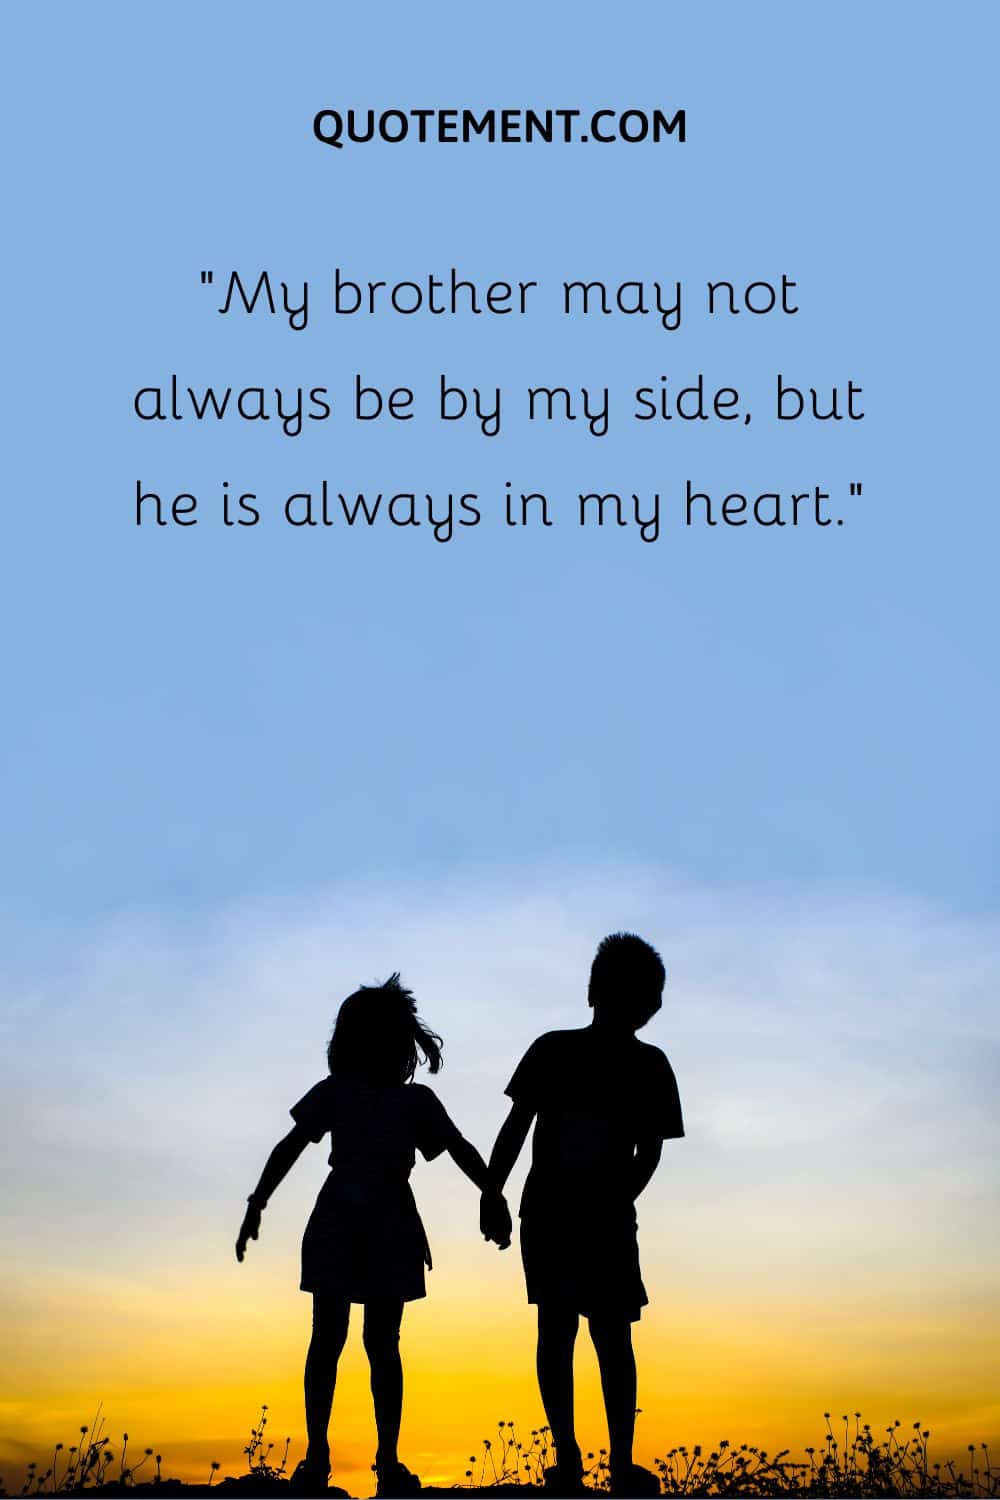 “My brother may not always be by my side, but he is always in my heart.”